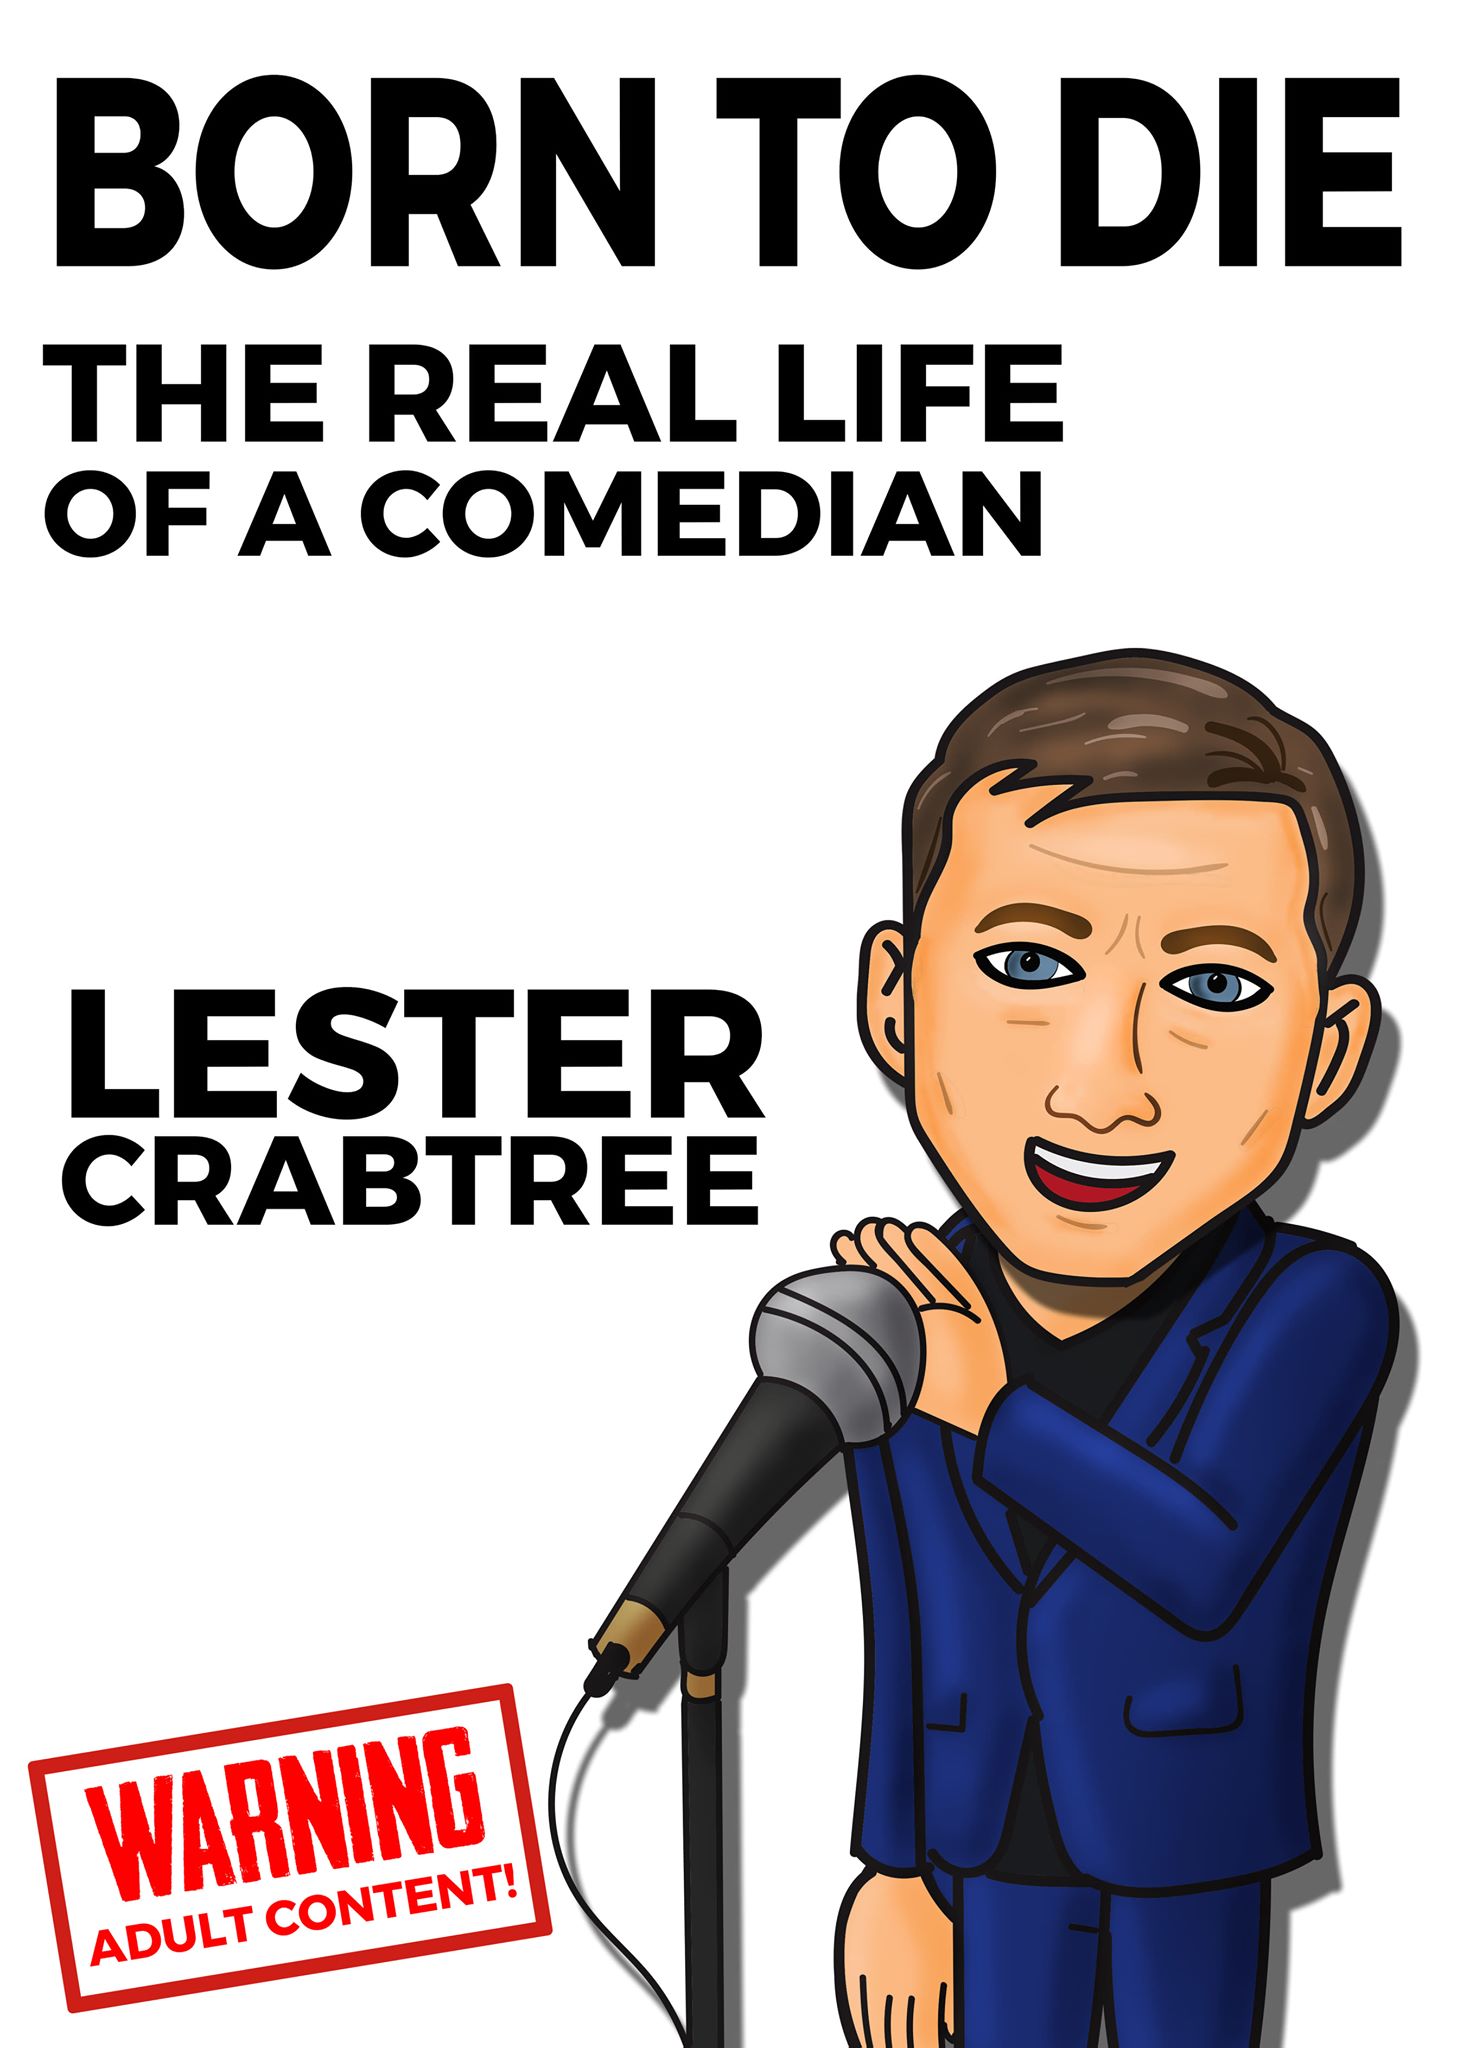 Born to Die - The Real Life of a Comedian Lester Crabtree